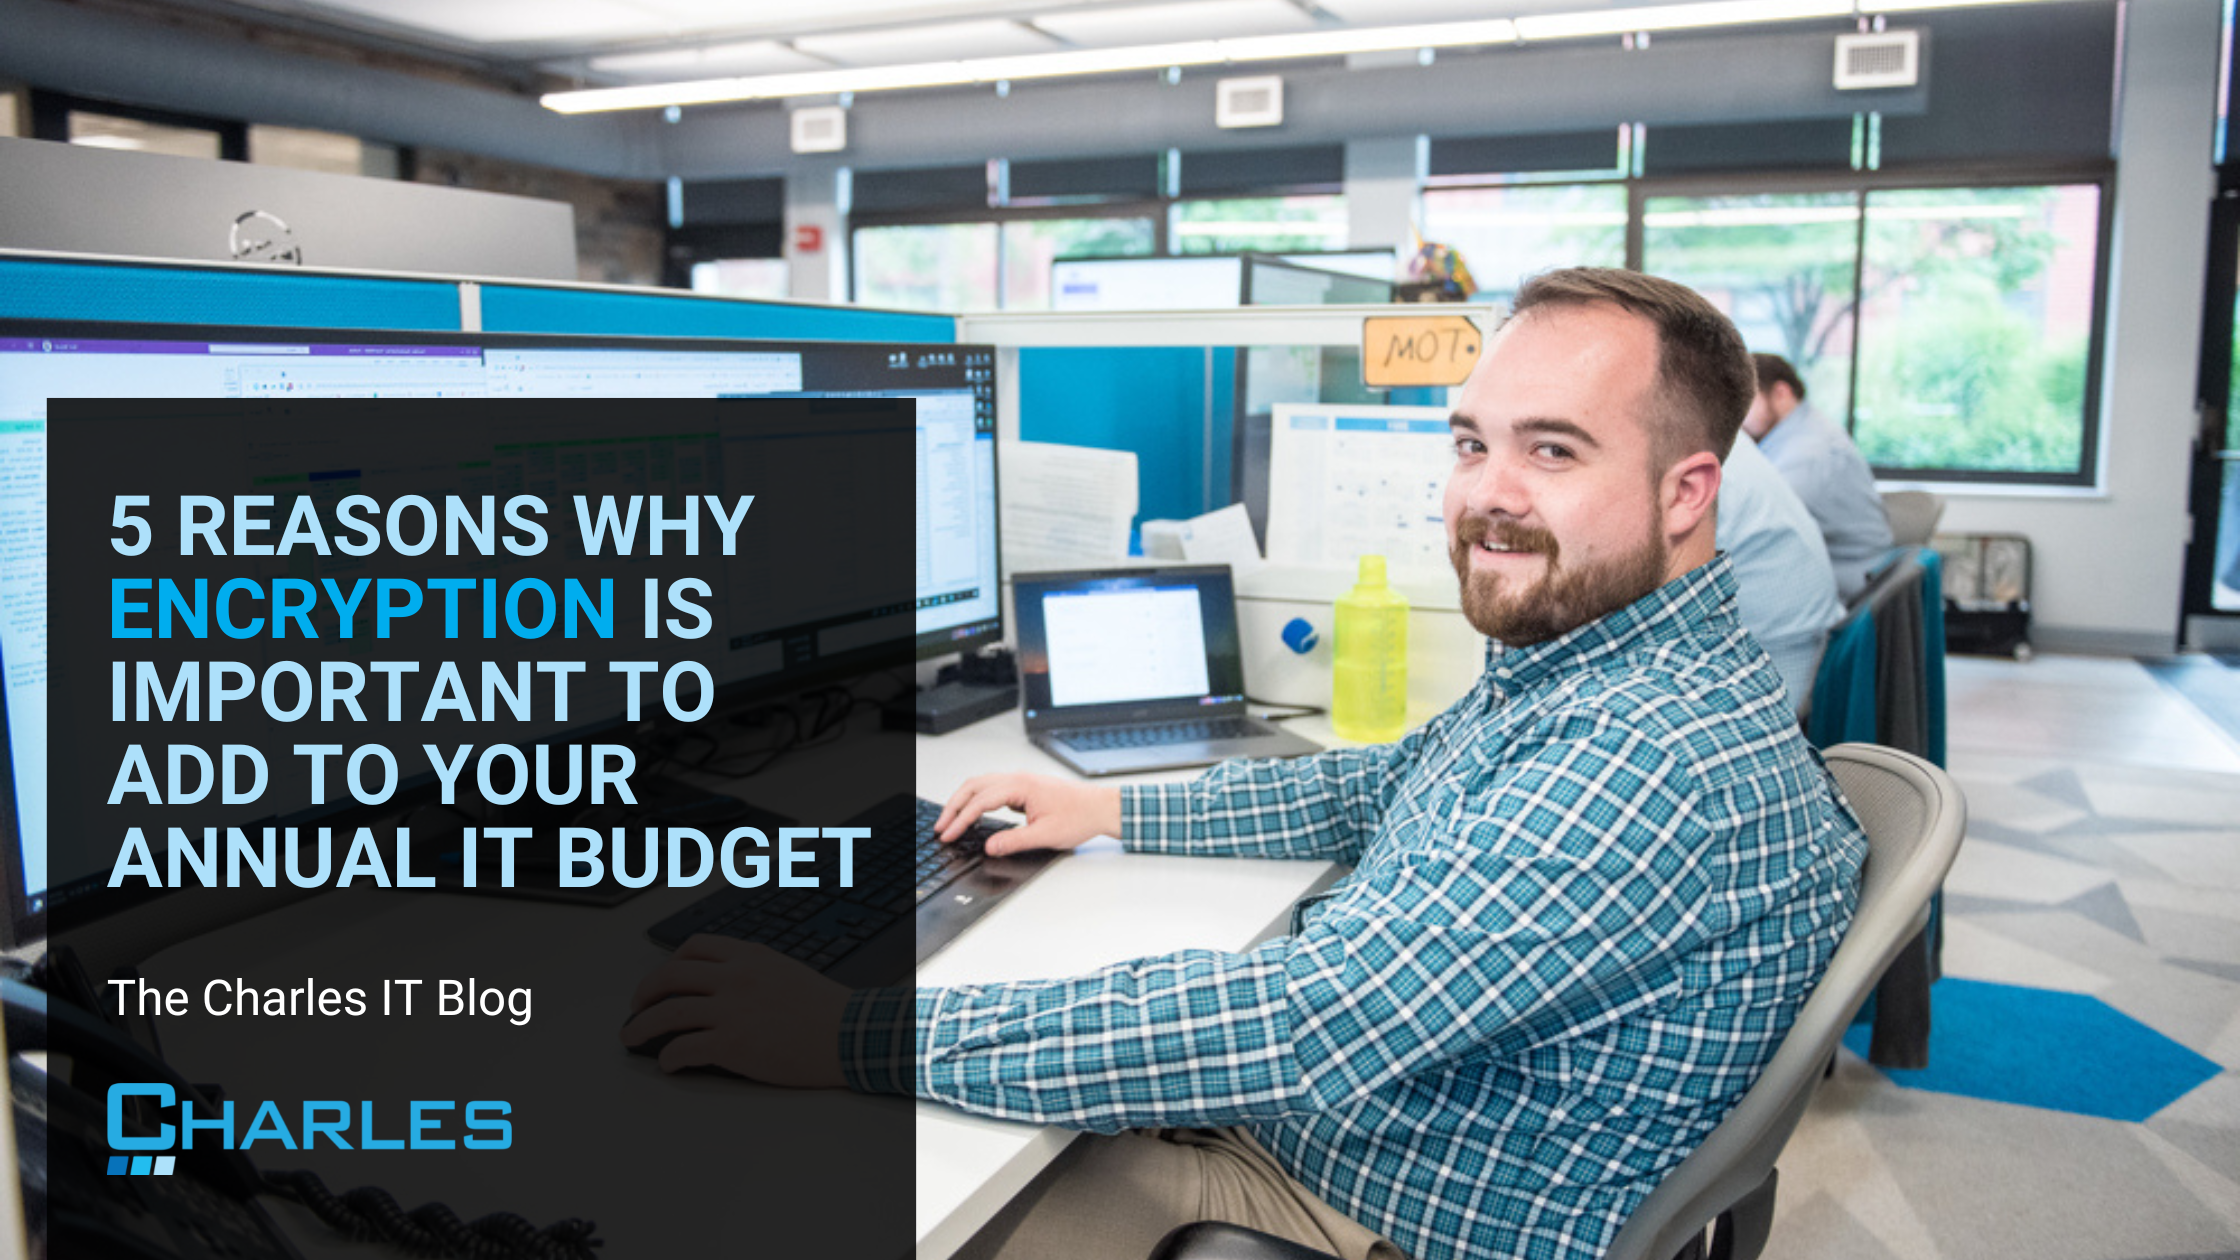 5 Reasons Why Encryption Is Important to Add to Your Annual IT Budget